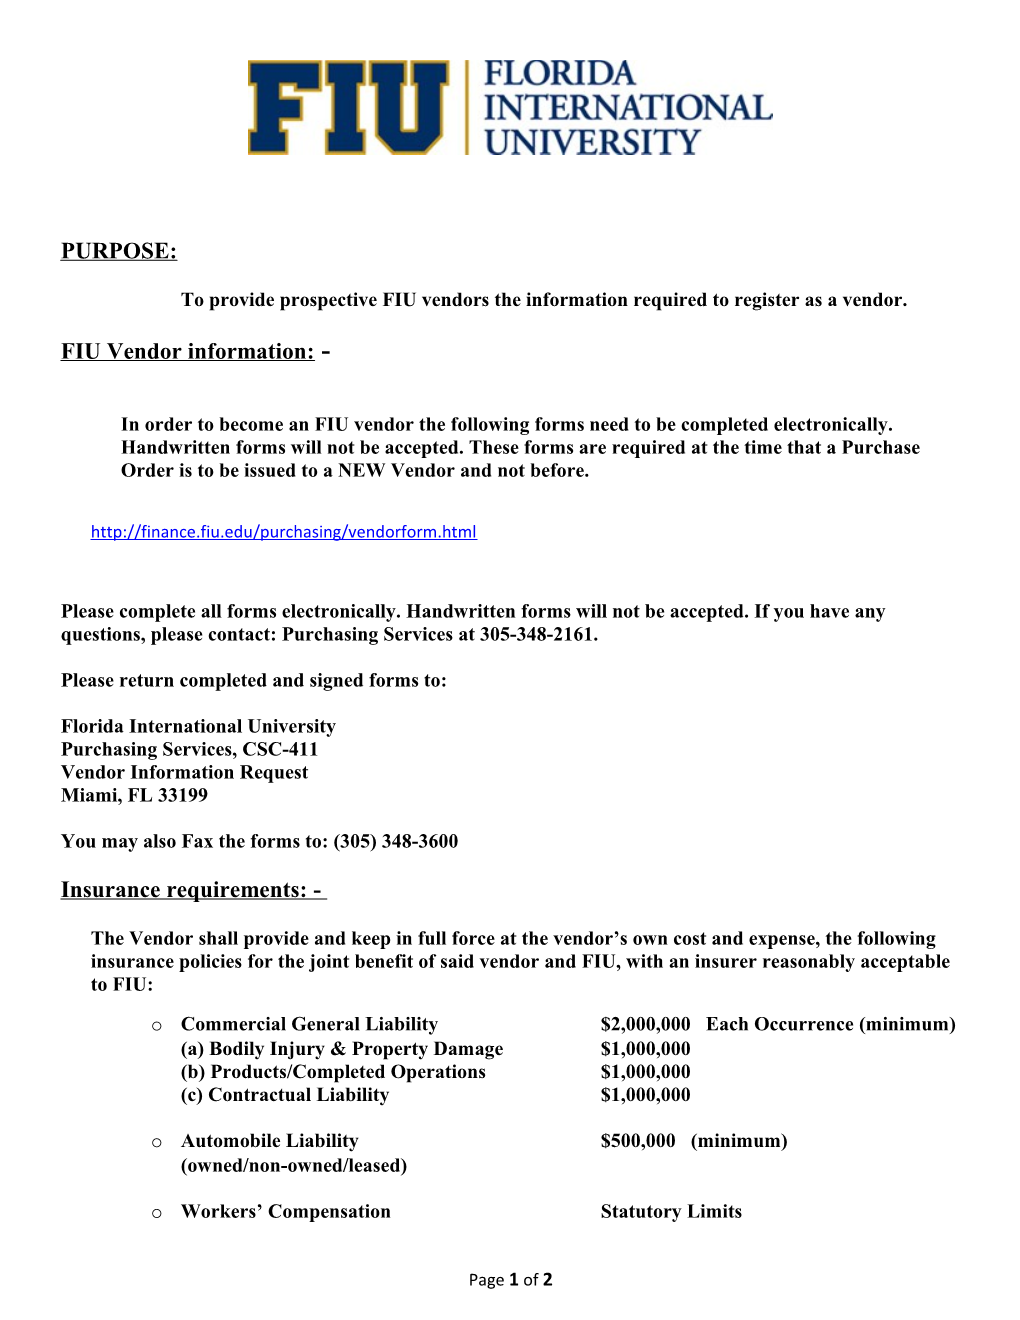 To Provide Prospective FIU Vendors the Information Required to Register As a Vendor